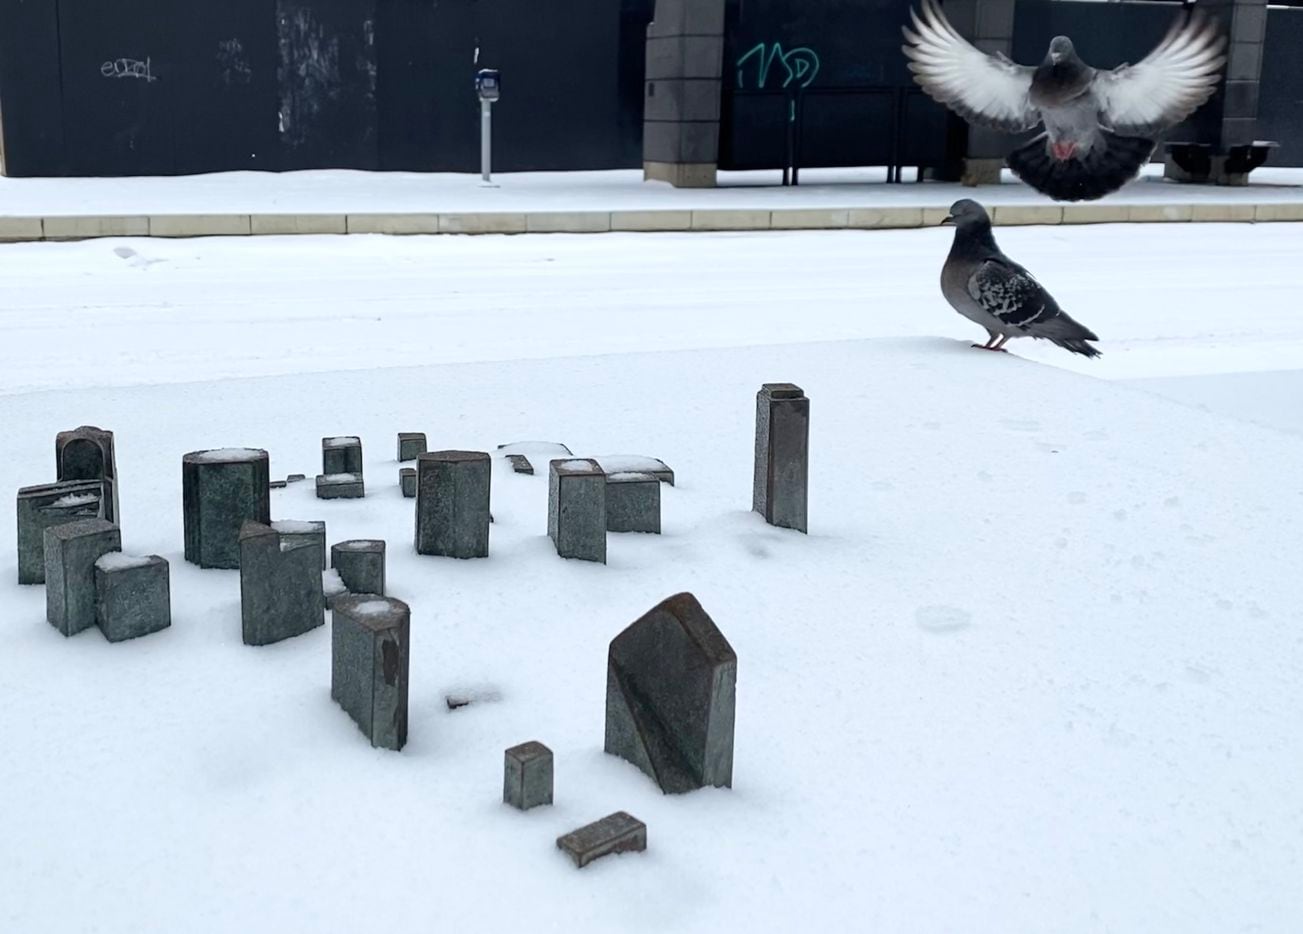 Two pigeons land, in the snow, on a miniature model of the City of Dallas at the intersection of Pacific Ave and Akard on Wednesday, February 17, 2021 in downtown Dallas.